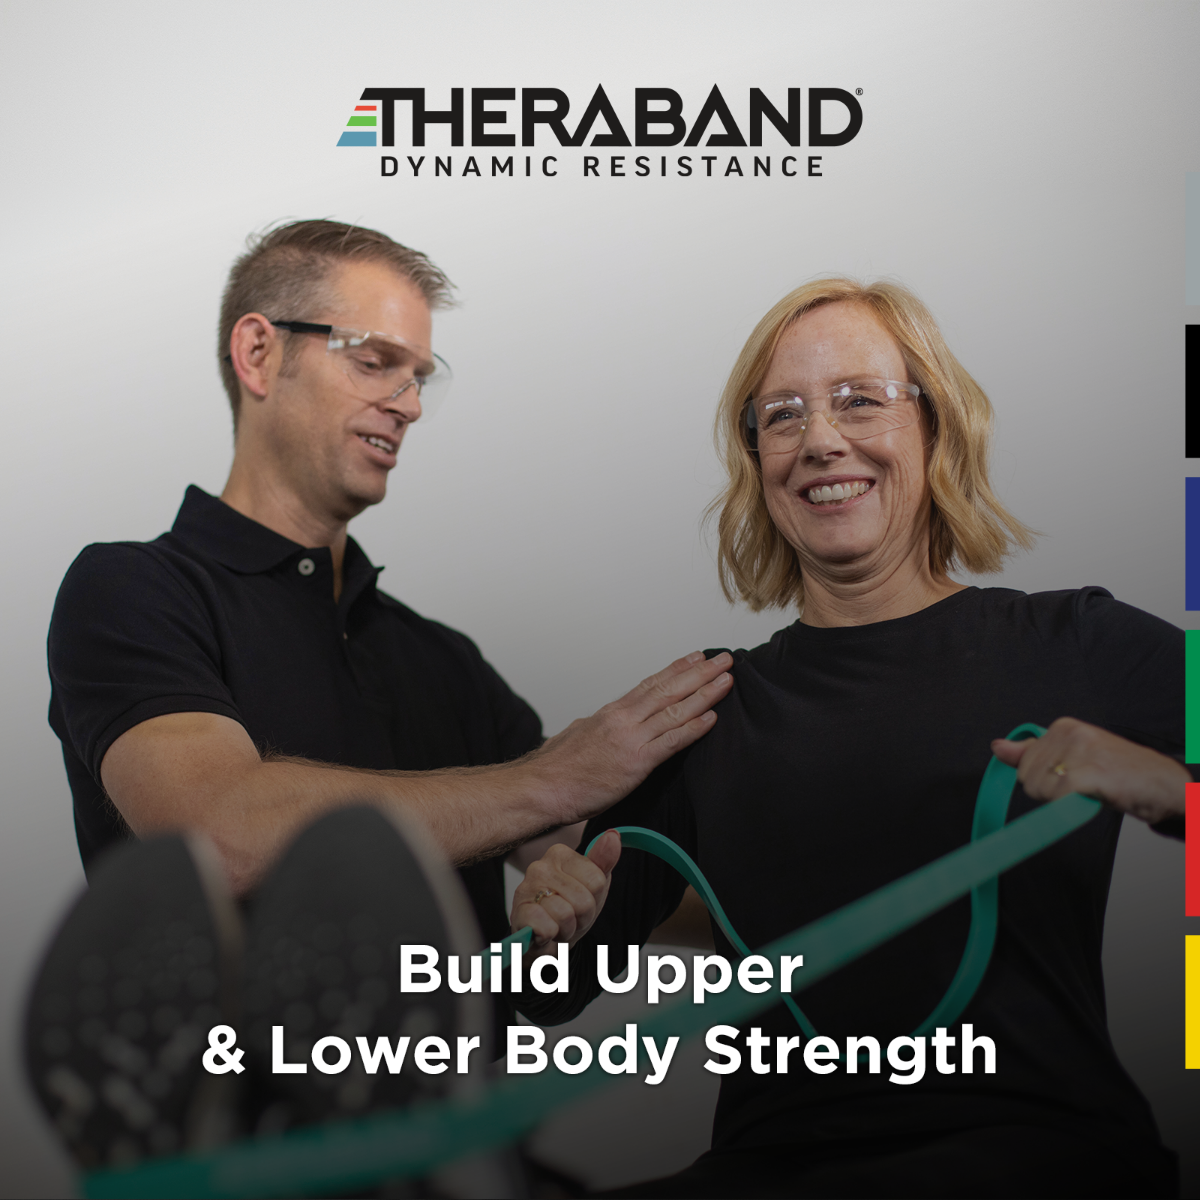 THERABAND High Resistance Bands - Overhead